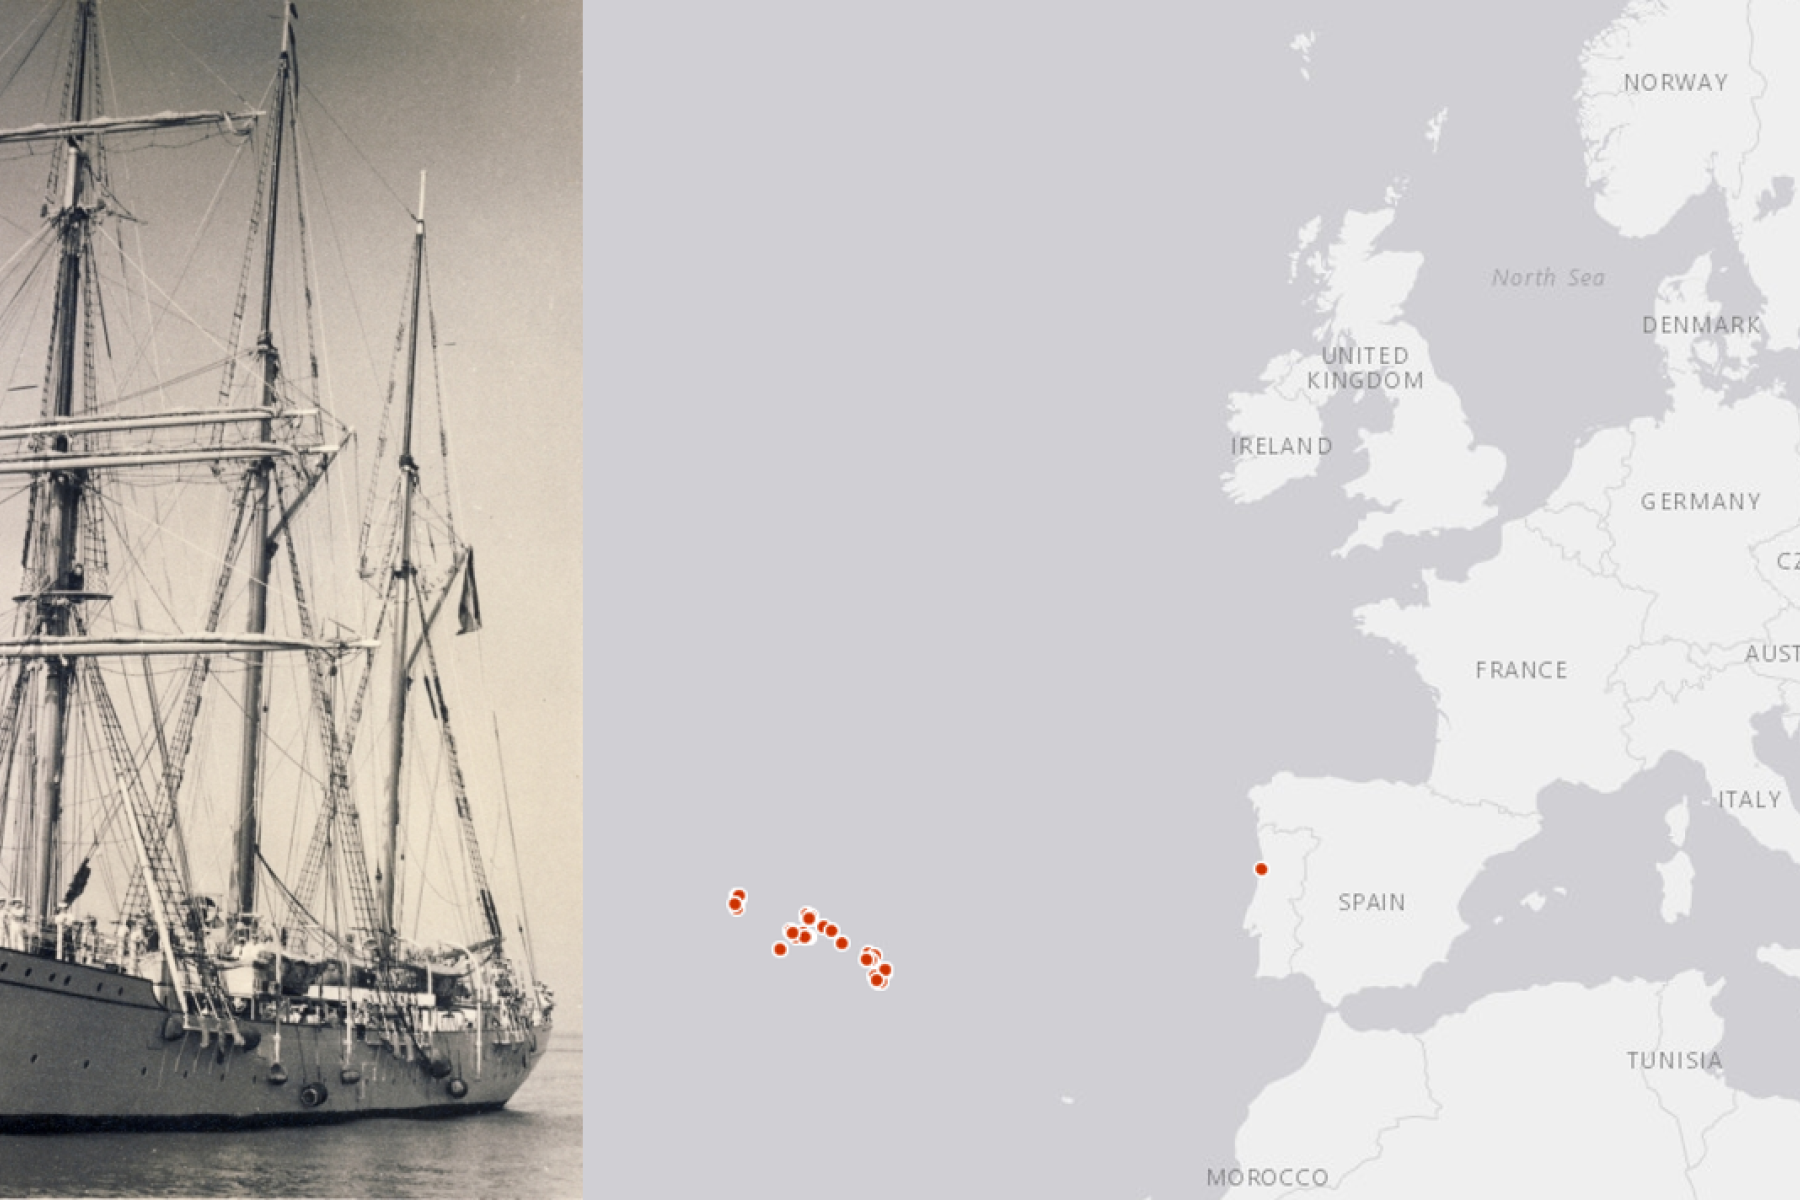 Image of the ship Mercator and skate image with biological data that can be retrieved through citizen science efforts. (Left image: Wikimedia Commons/John Hill - commons.wikimedia.org, CC BY-SA 4.0; Right image: © European Union) 